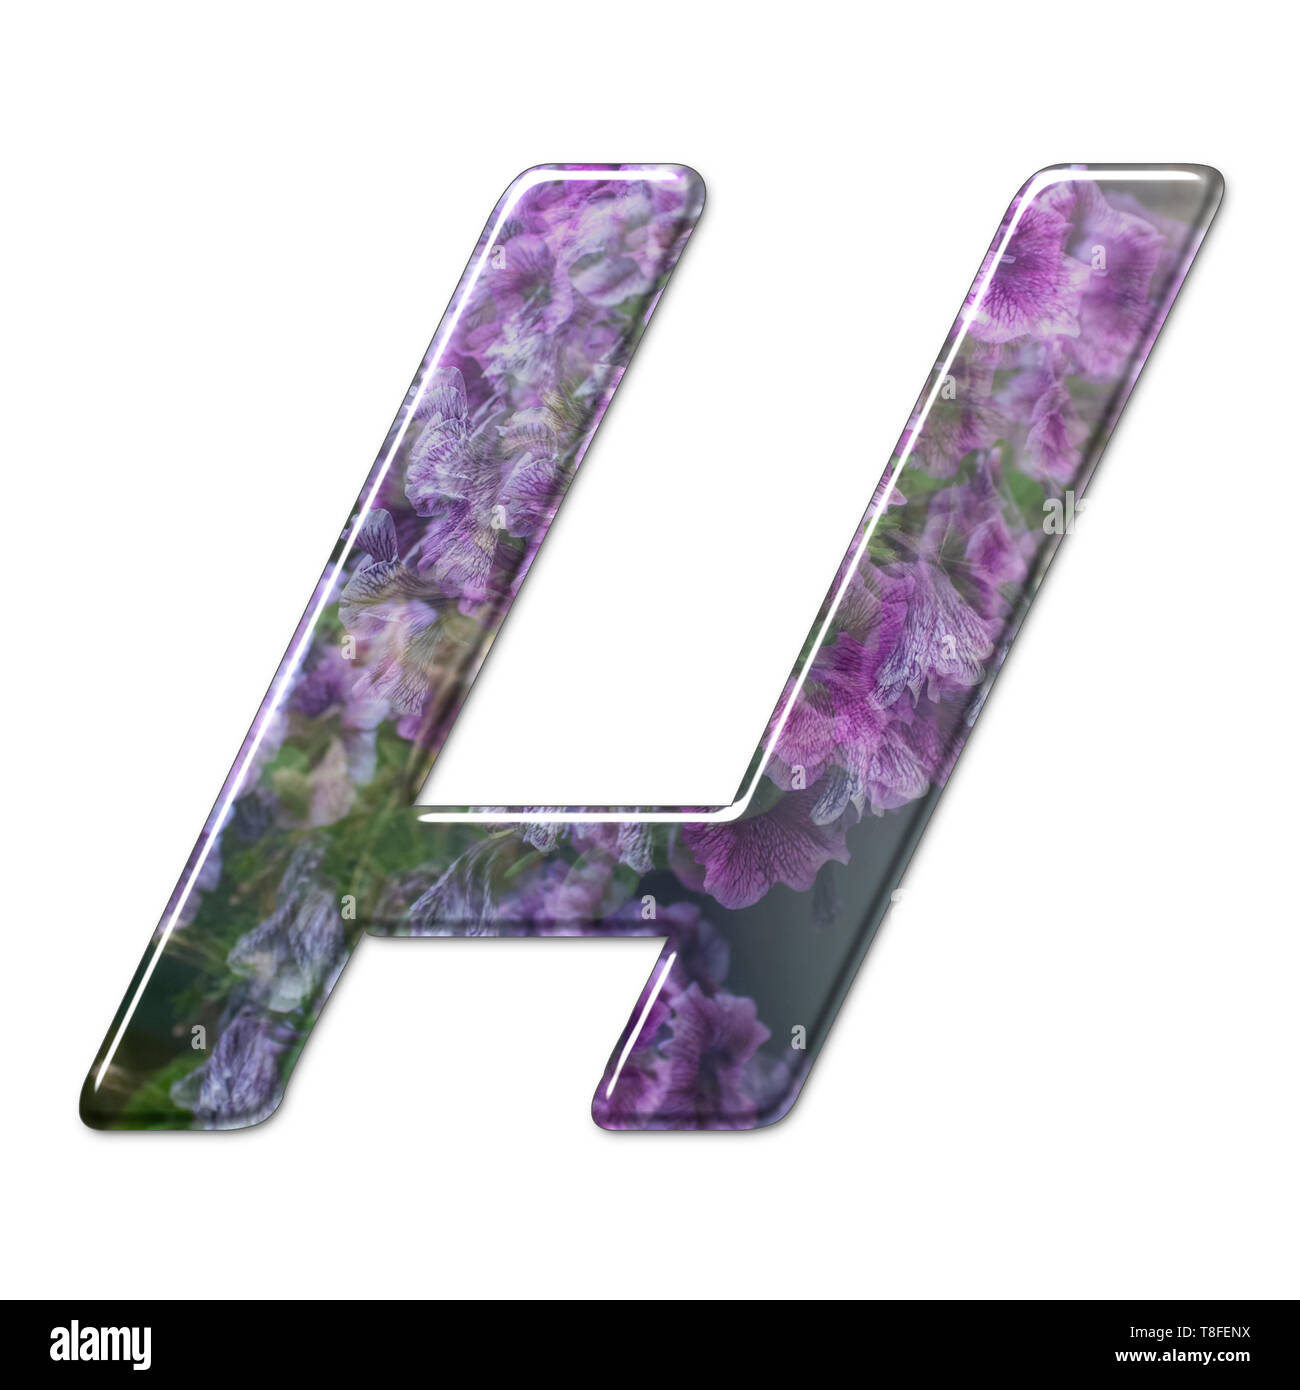 The Capitol Letter H Part of a set of letters, Numbers and symbols of 3D Alphabet made with a floral image on white background Stock Photo